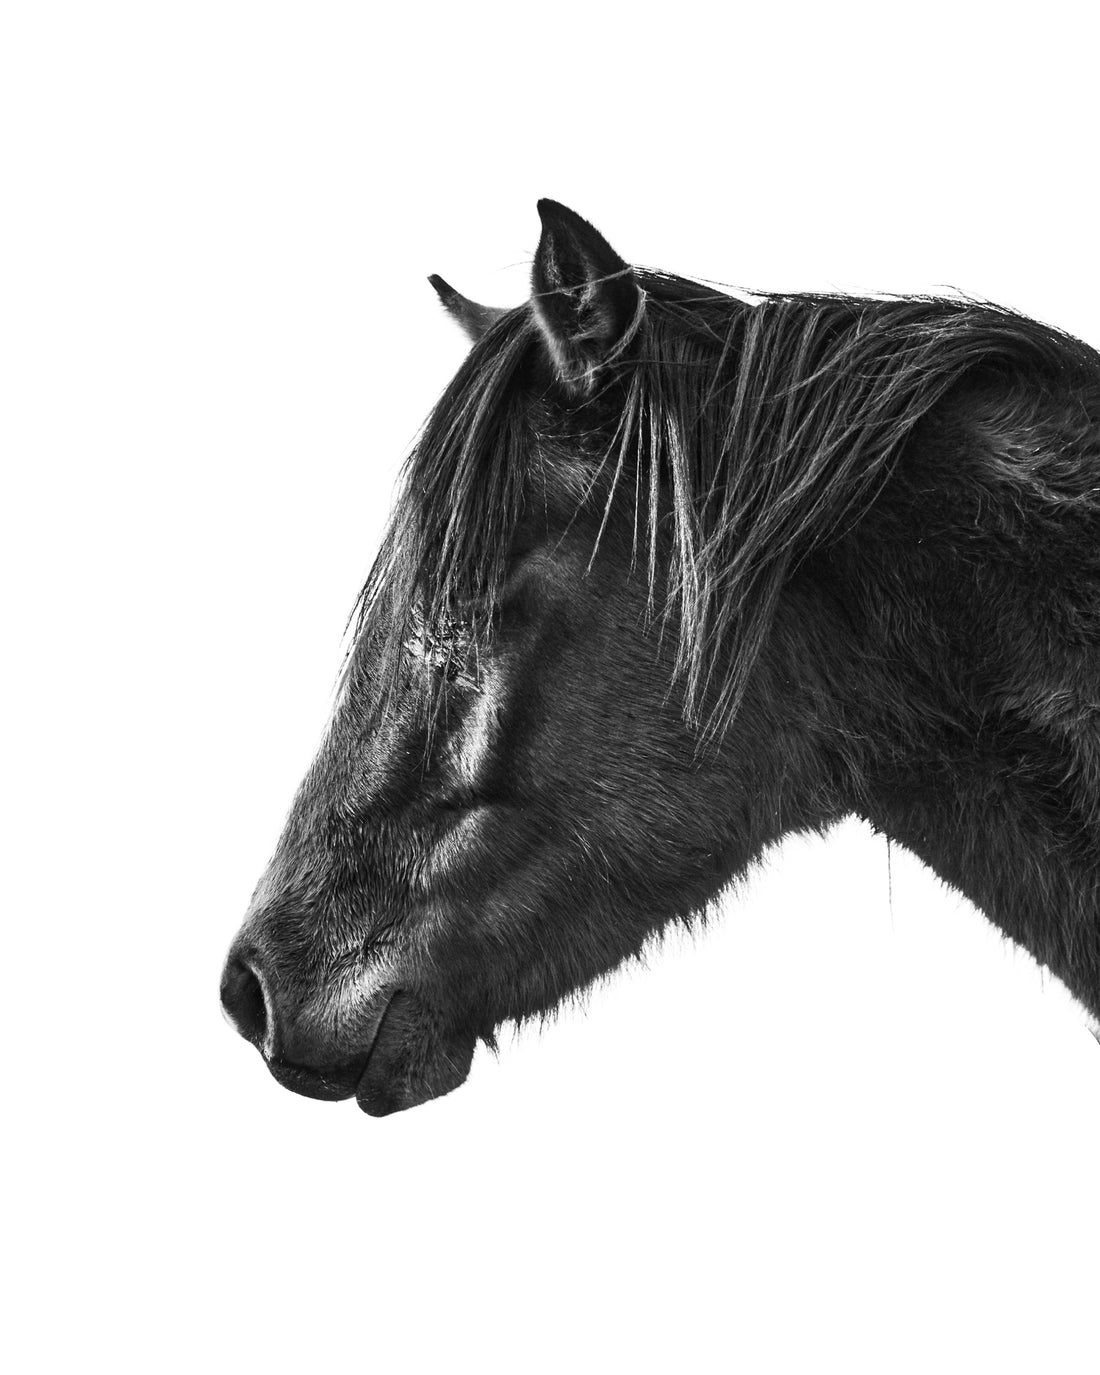 Black and white photo of a young horse. Ethan Oberst Photography